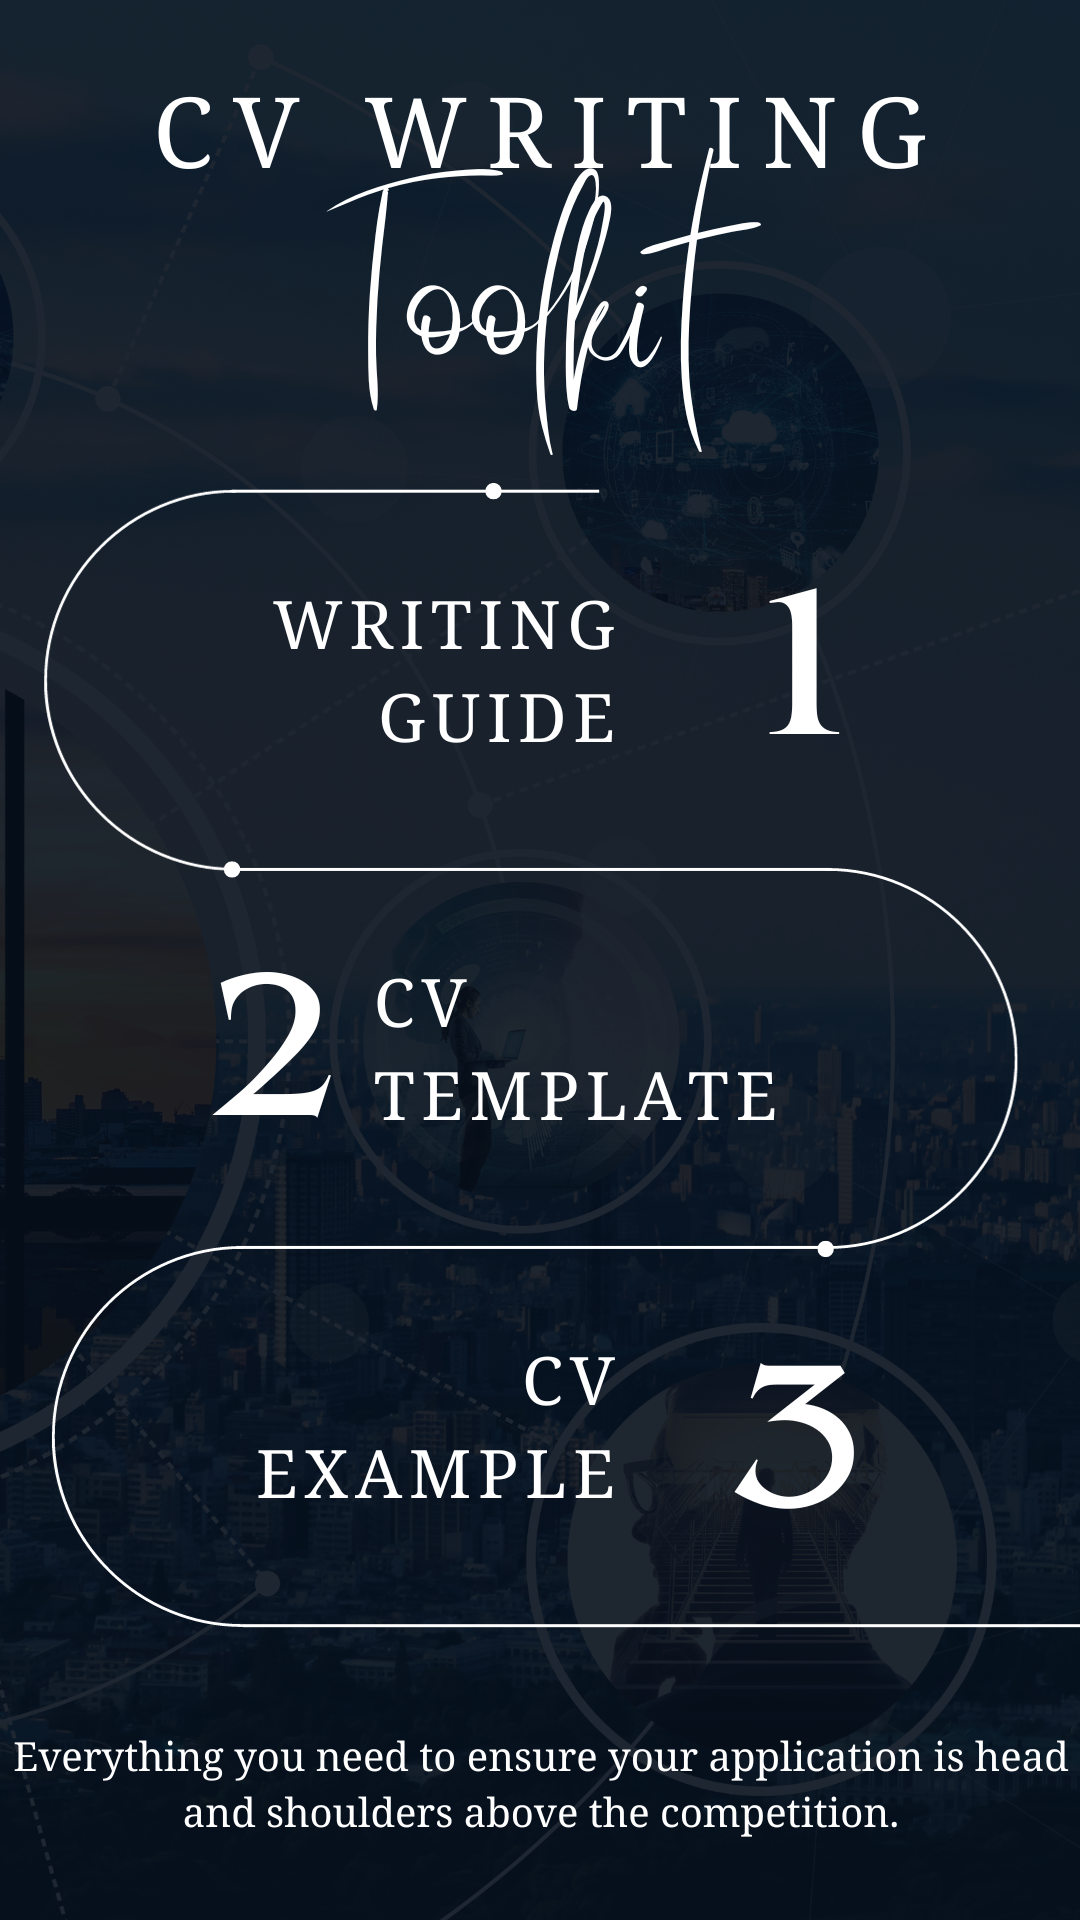 Cost Accountant CV Writing Toolkit